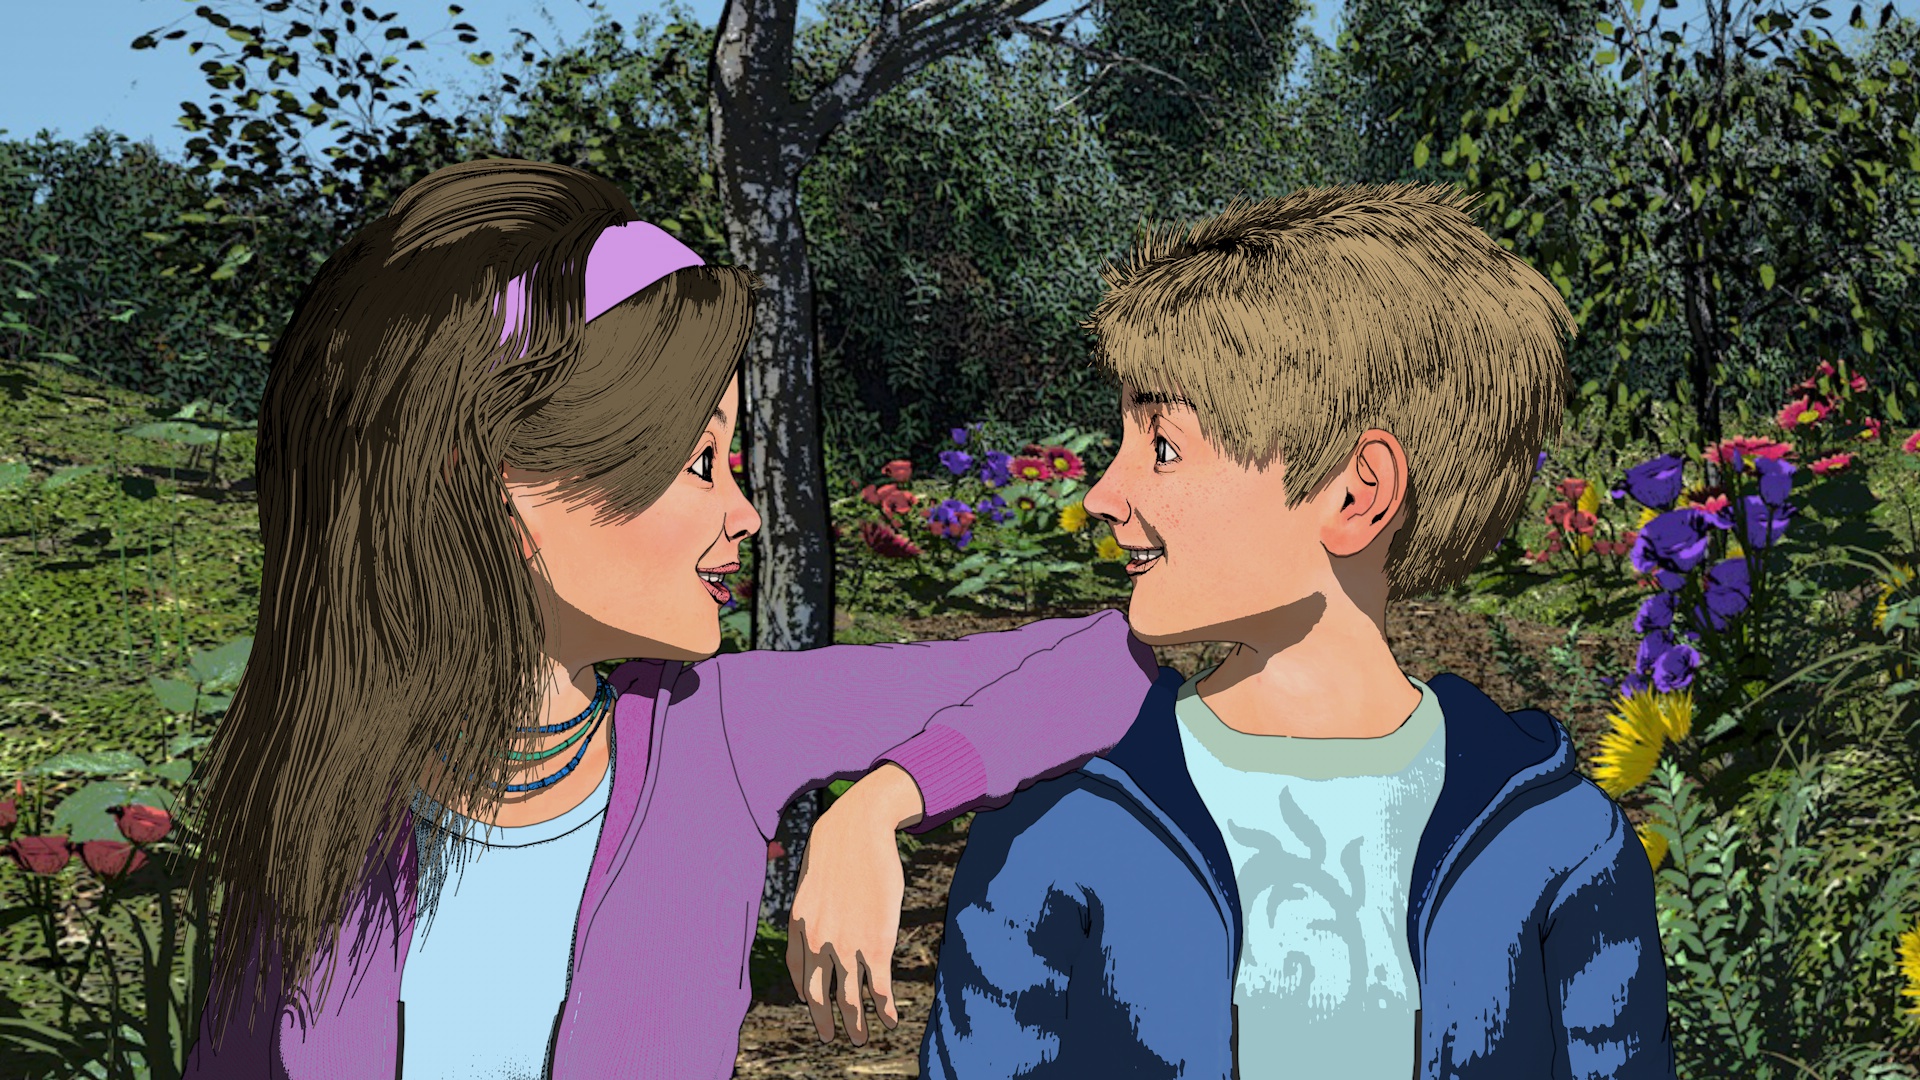 Outdoor scenes, which brighten when the boys are taught that girls and women are friends, mothers and sisters, were modeled from scratch in Cinema 4D Interior scenes were a mix of custom work and models purchased online.